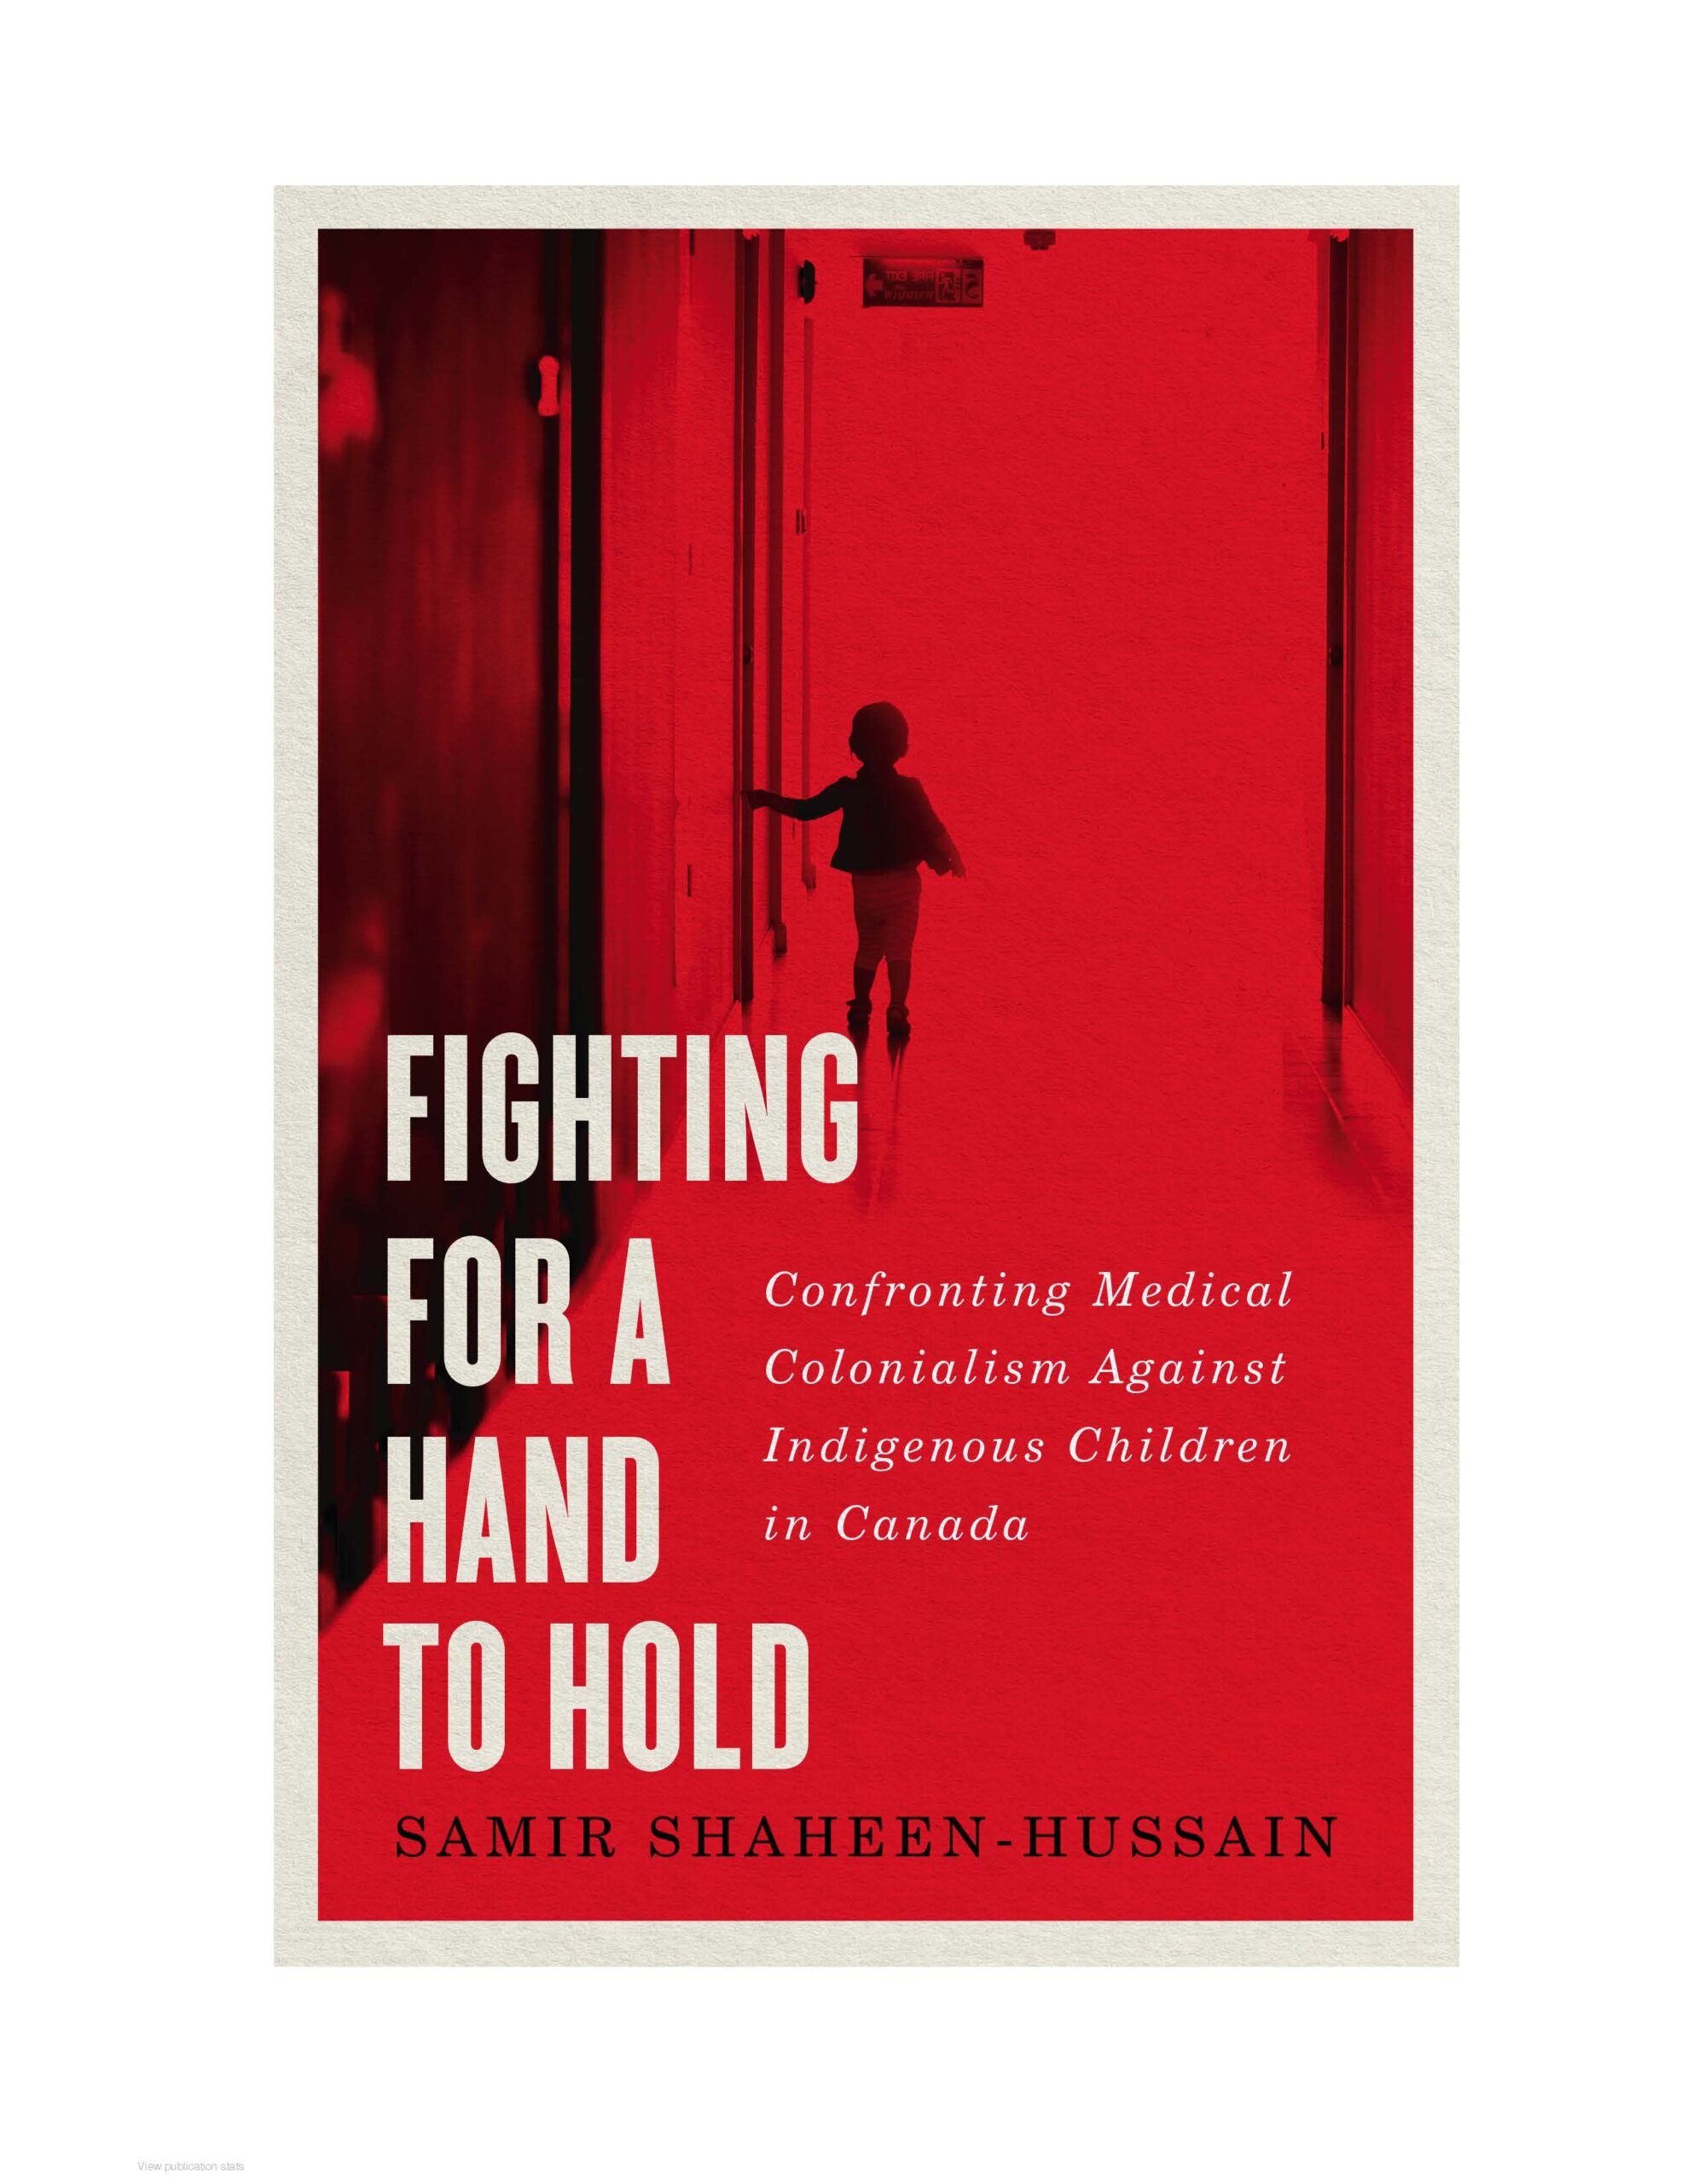 Book Cover for "Fighting for a hand to hold"